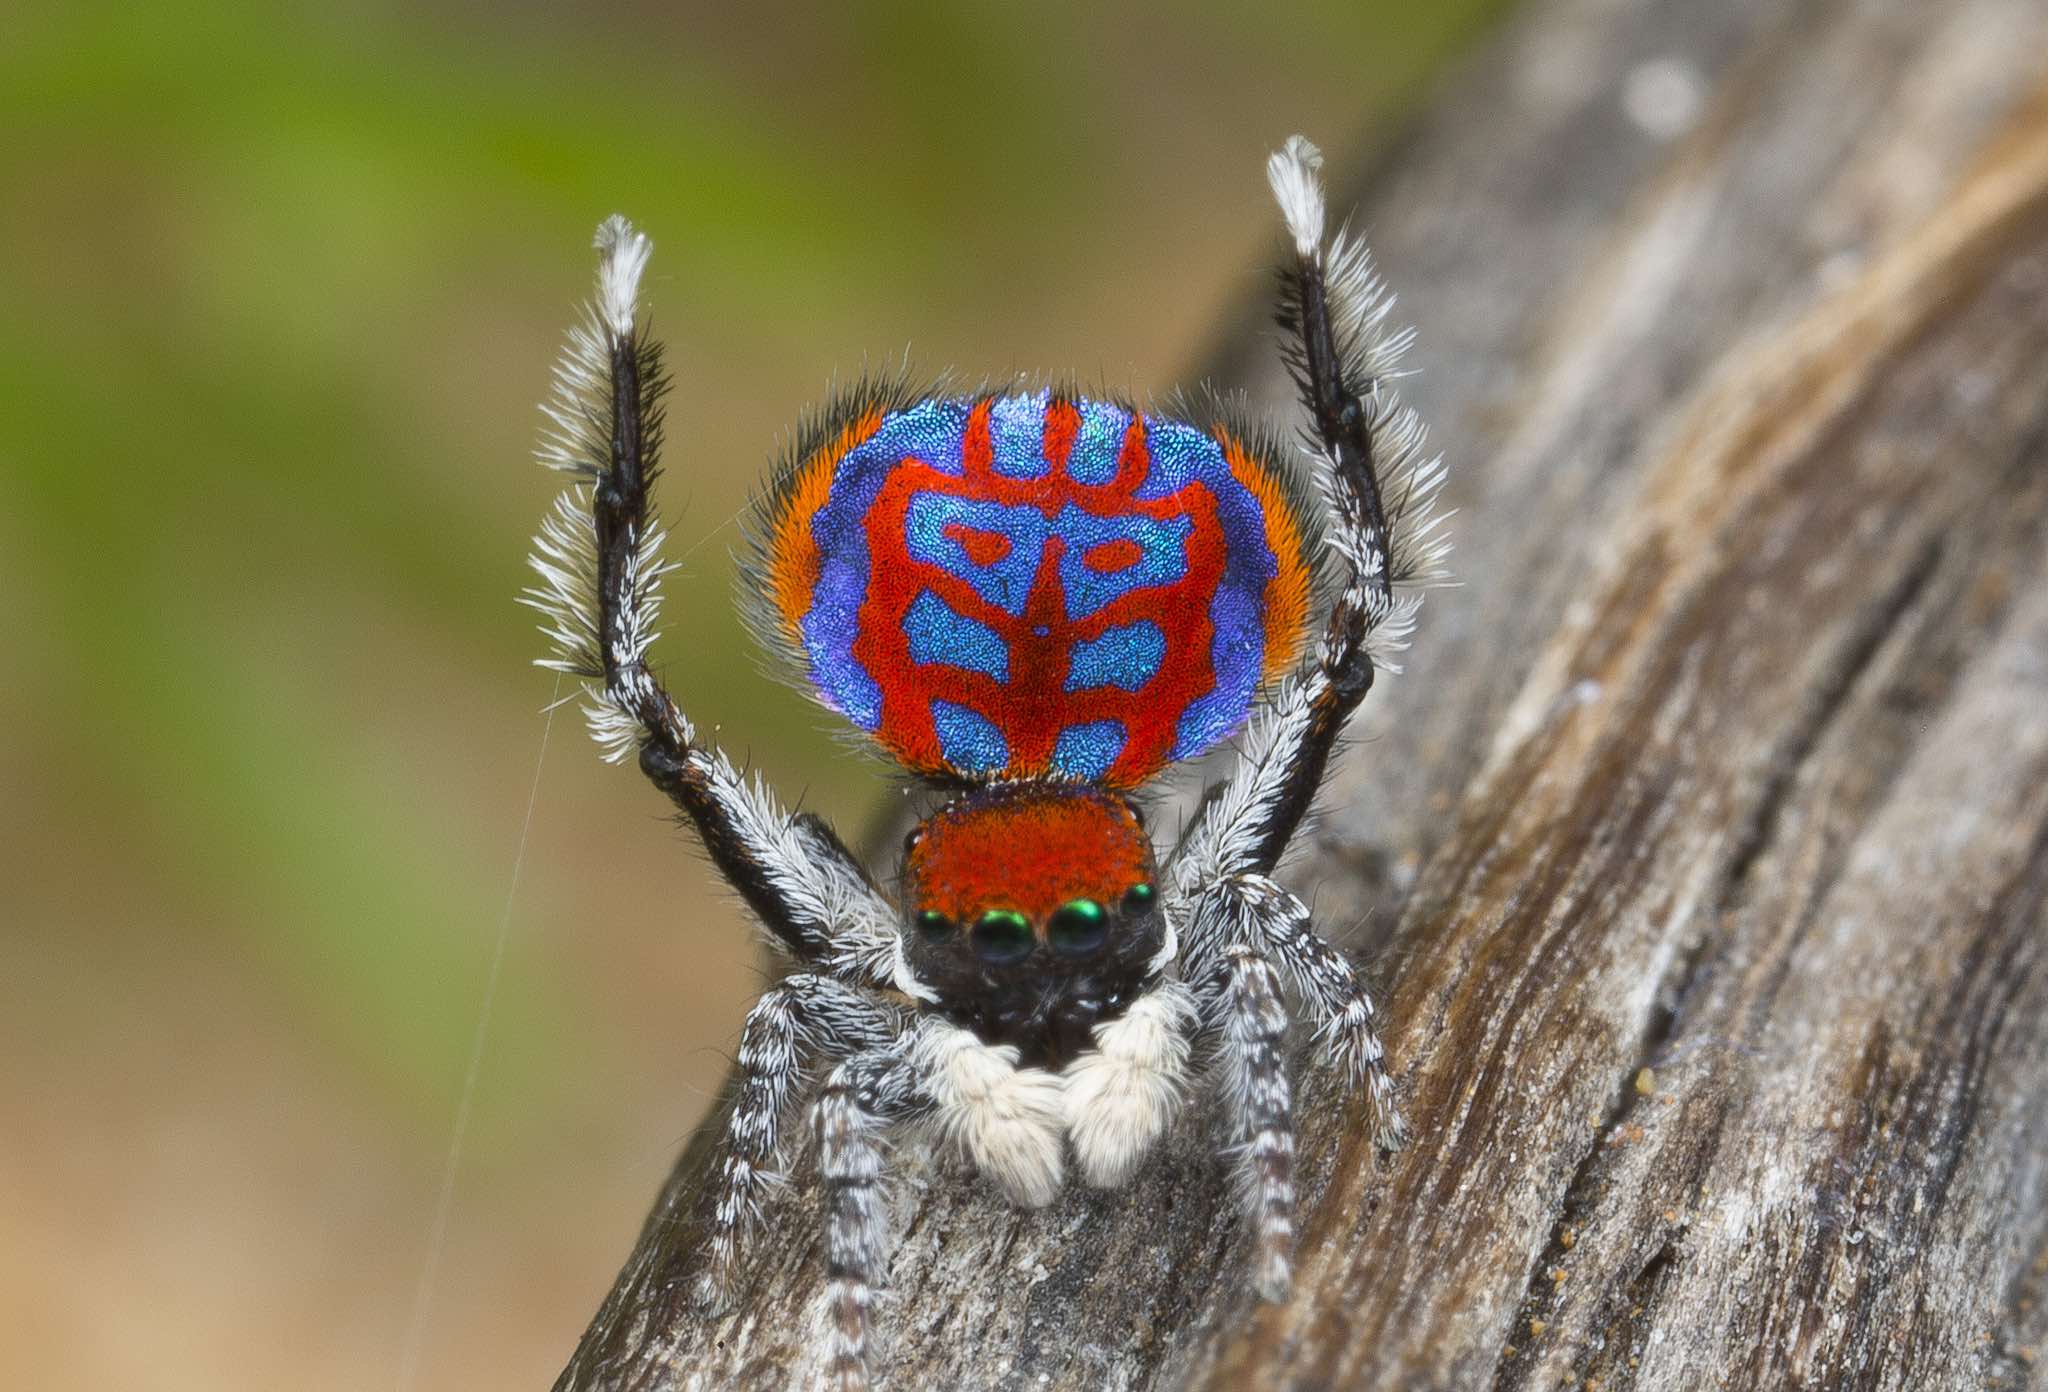 Conservation Status Of Peacock Spider